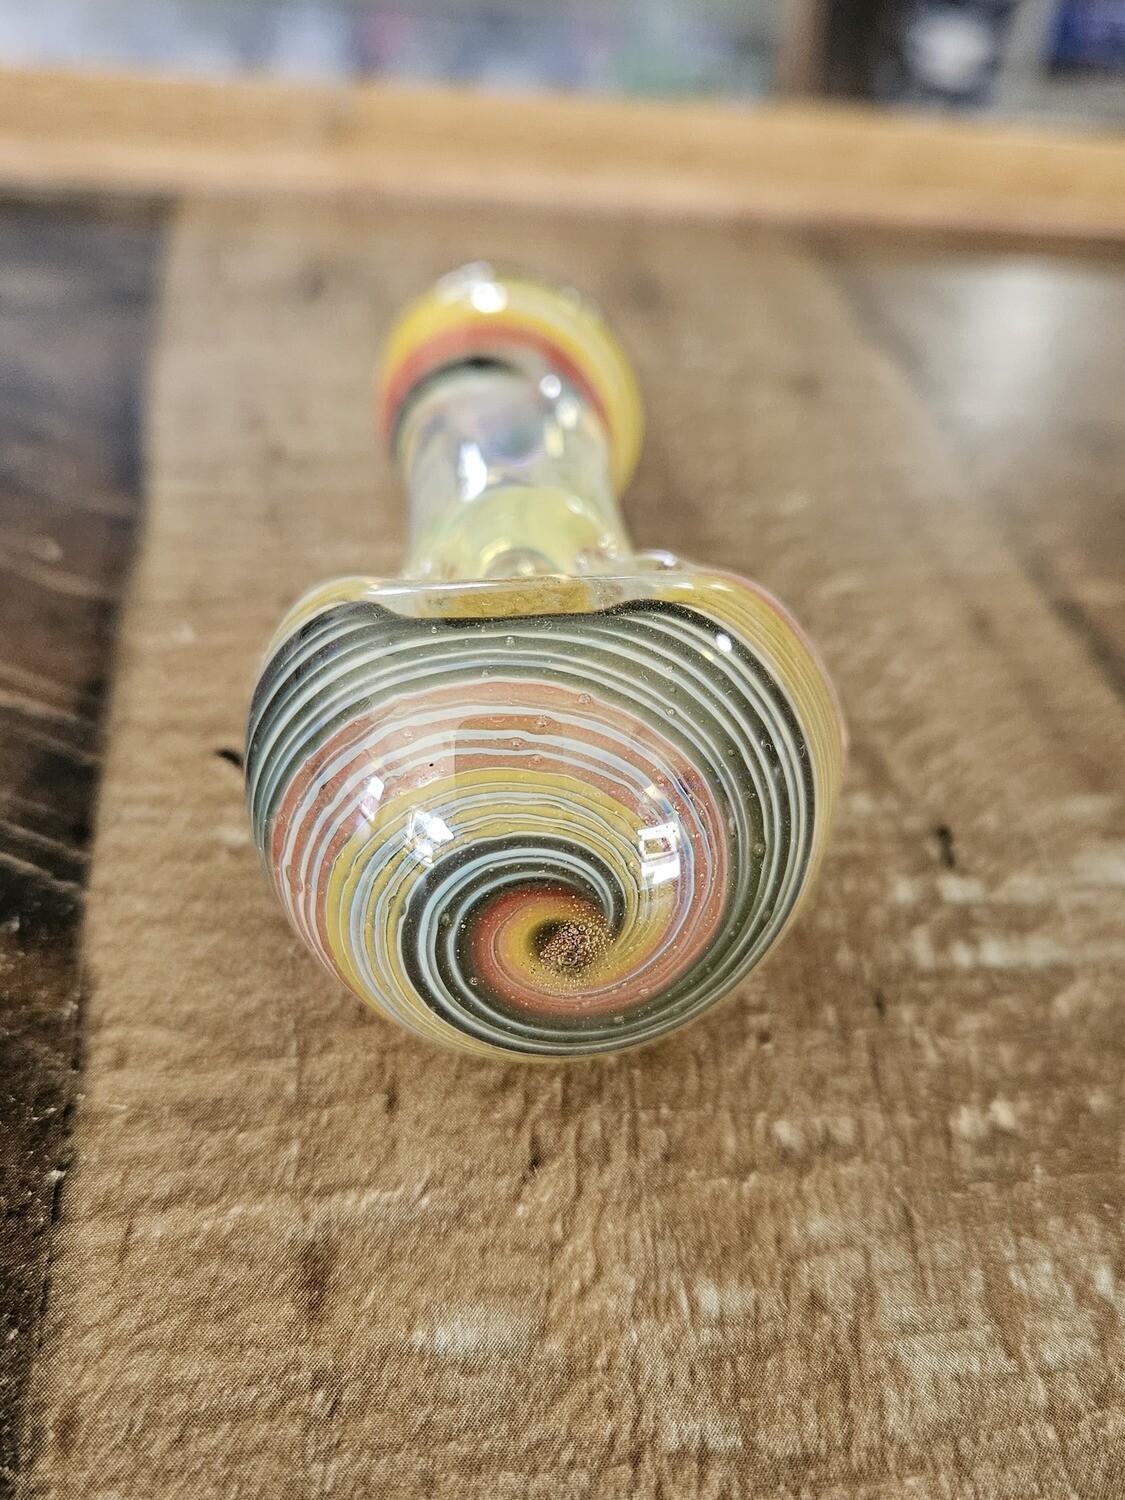 Black, Yellow, and Red Spiral Spoon